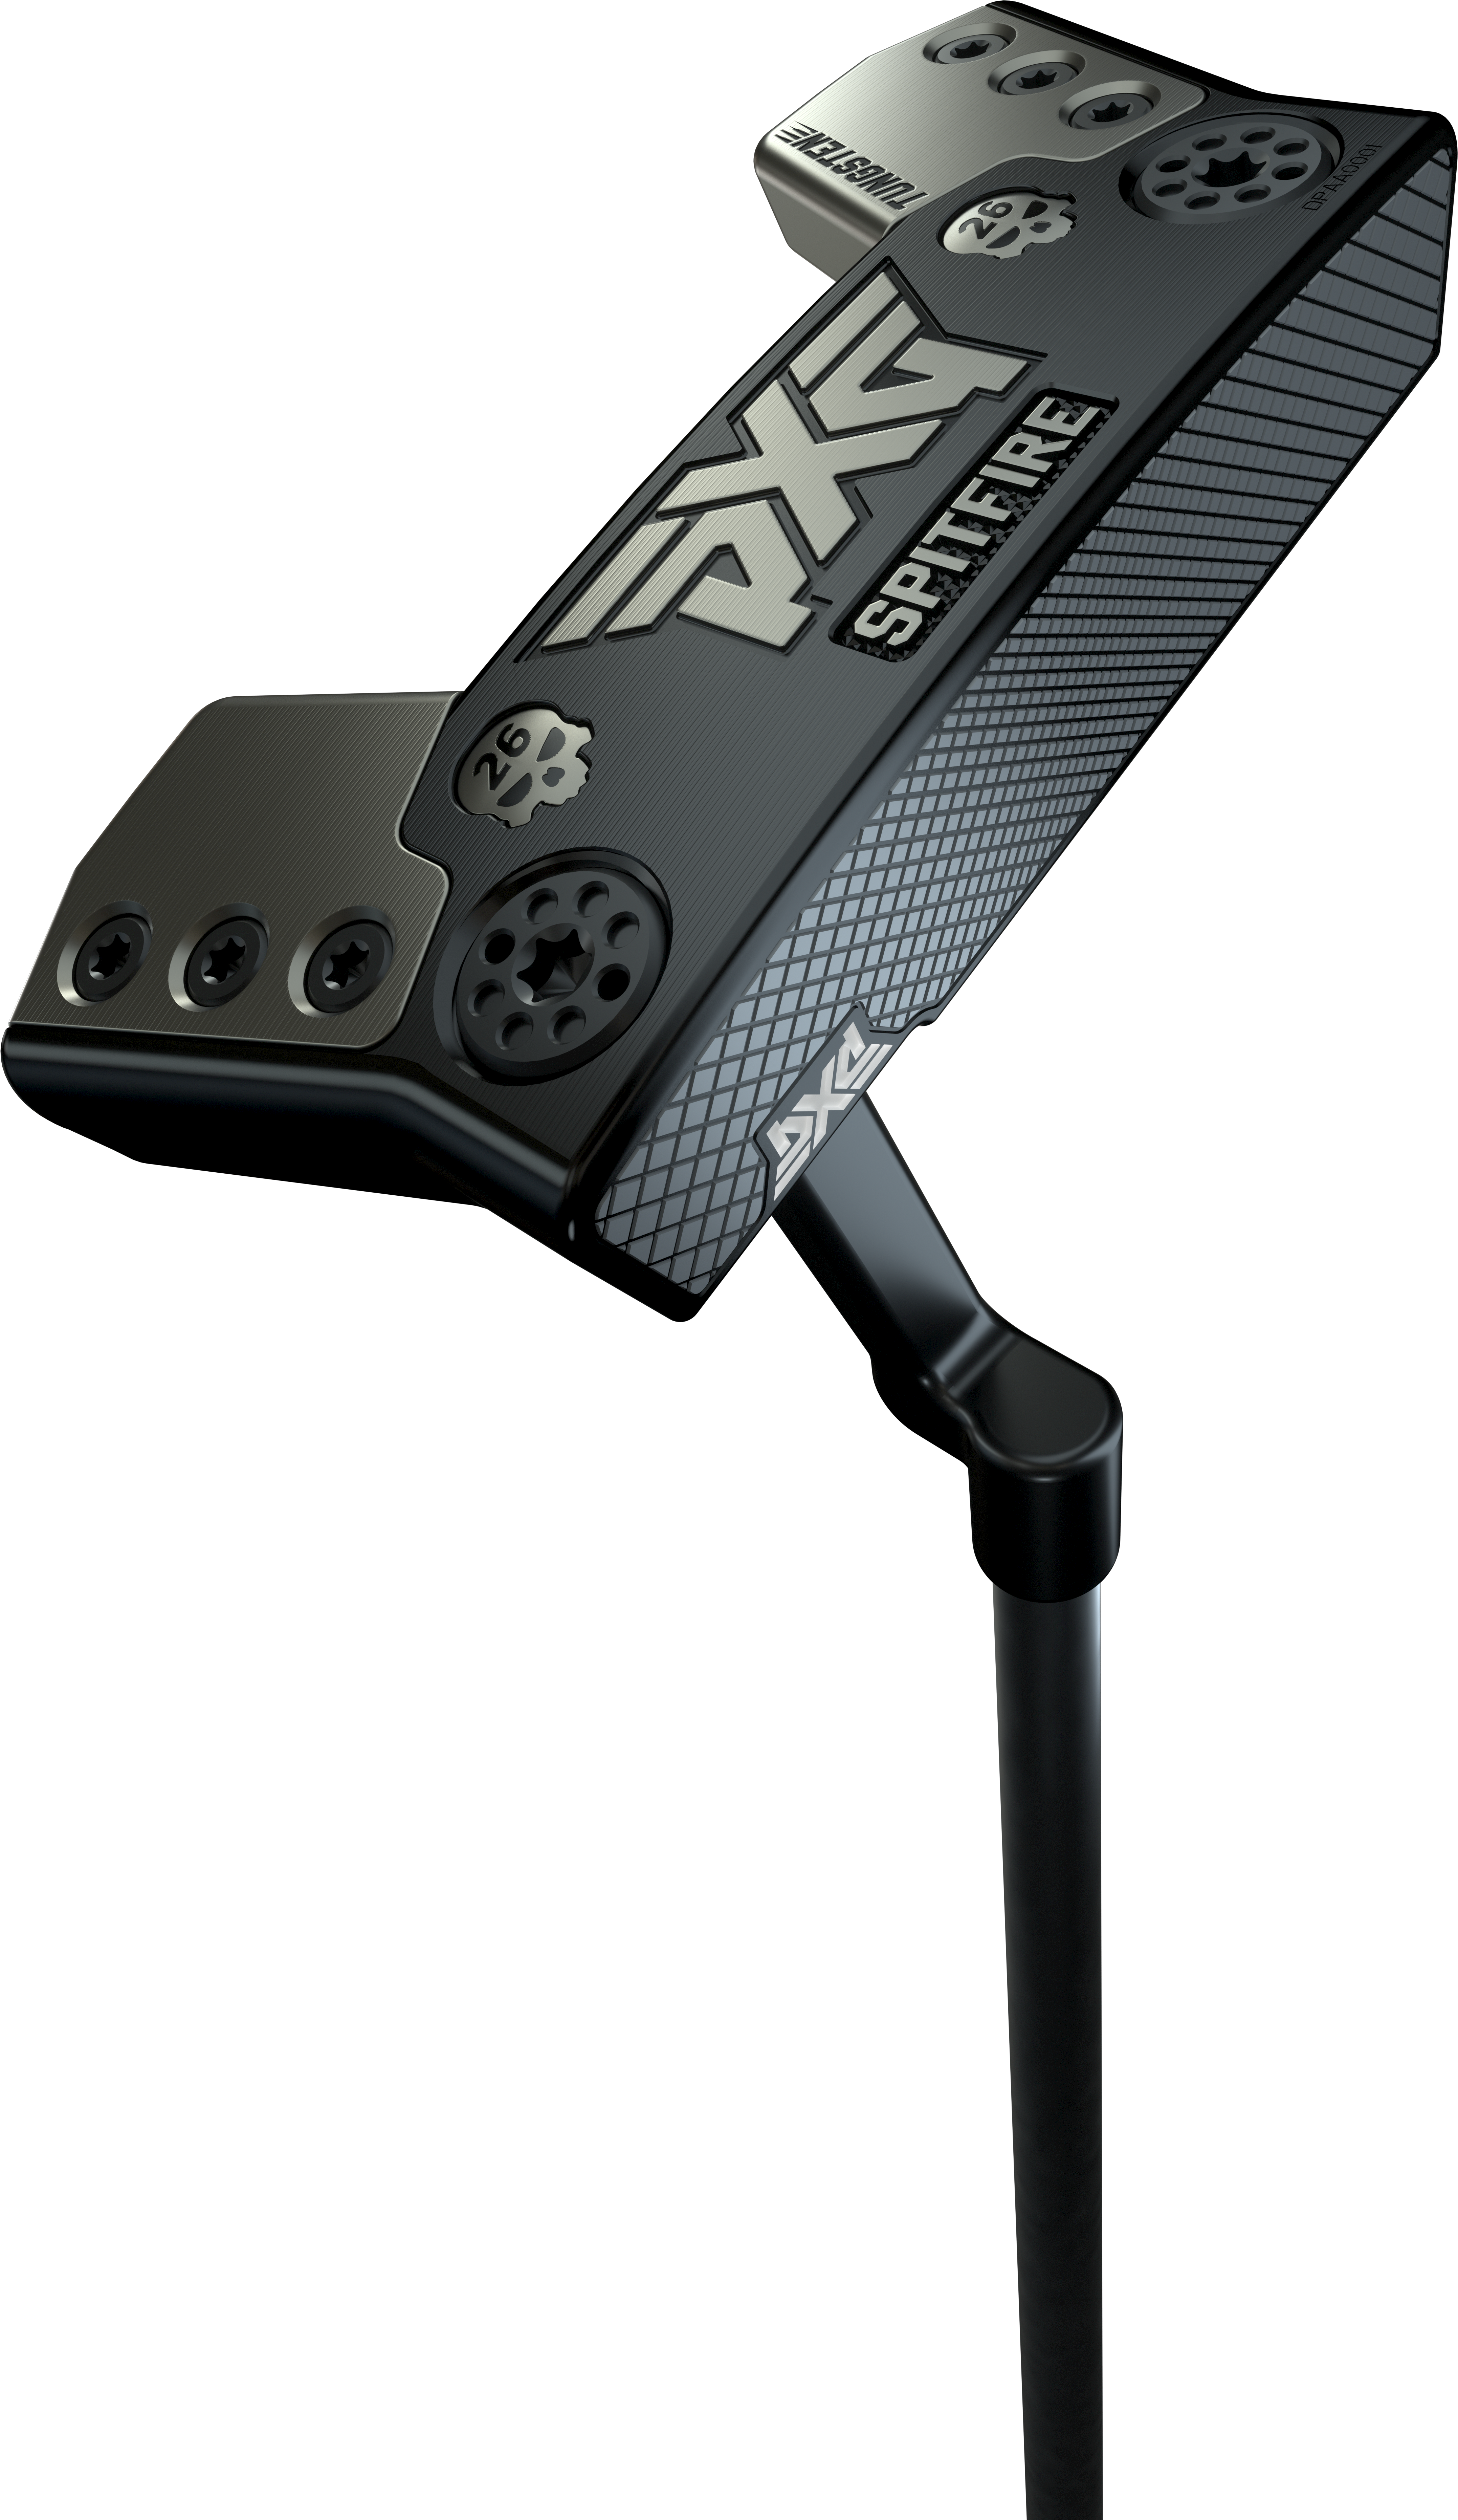 Pxg Adds To Its Battle Ready Line Of Putters With Two New Blade Options Golf Equipment Clubs Balls Bags Golf Digest